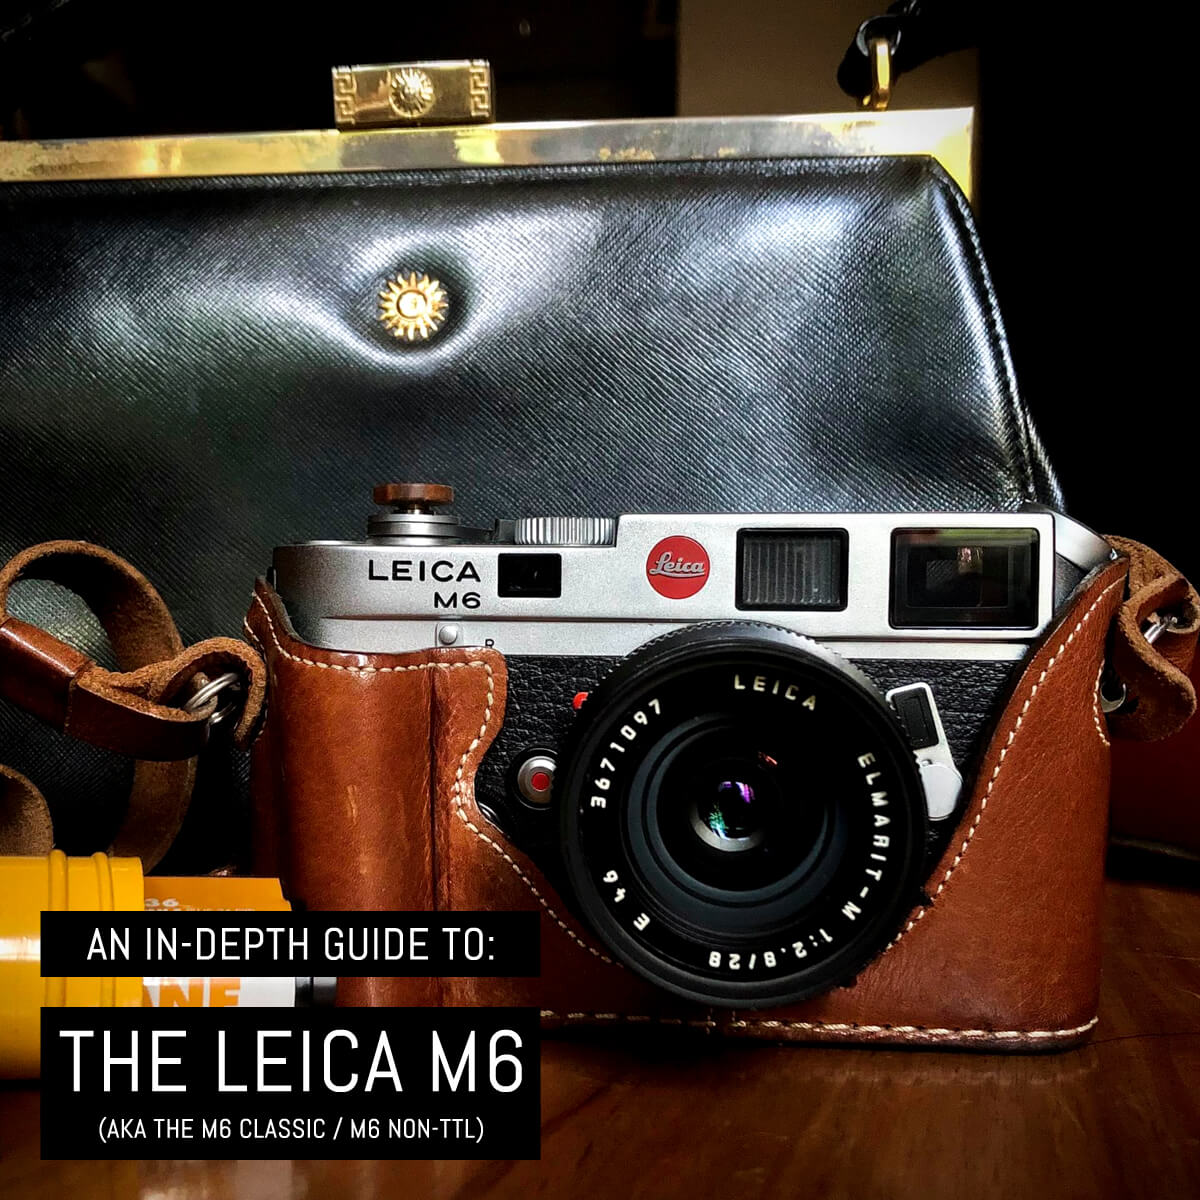 An in-depth guide to: The Leica M6 (aka M6 Classic + M6 Non-TTL)